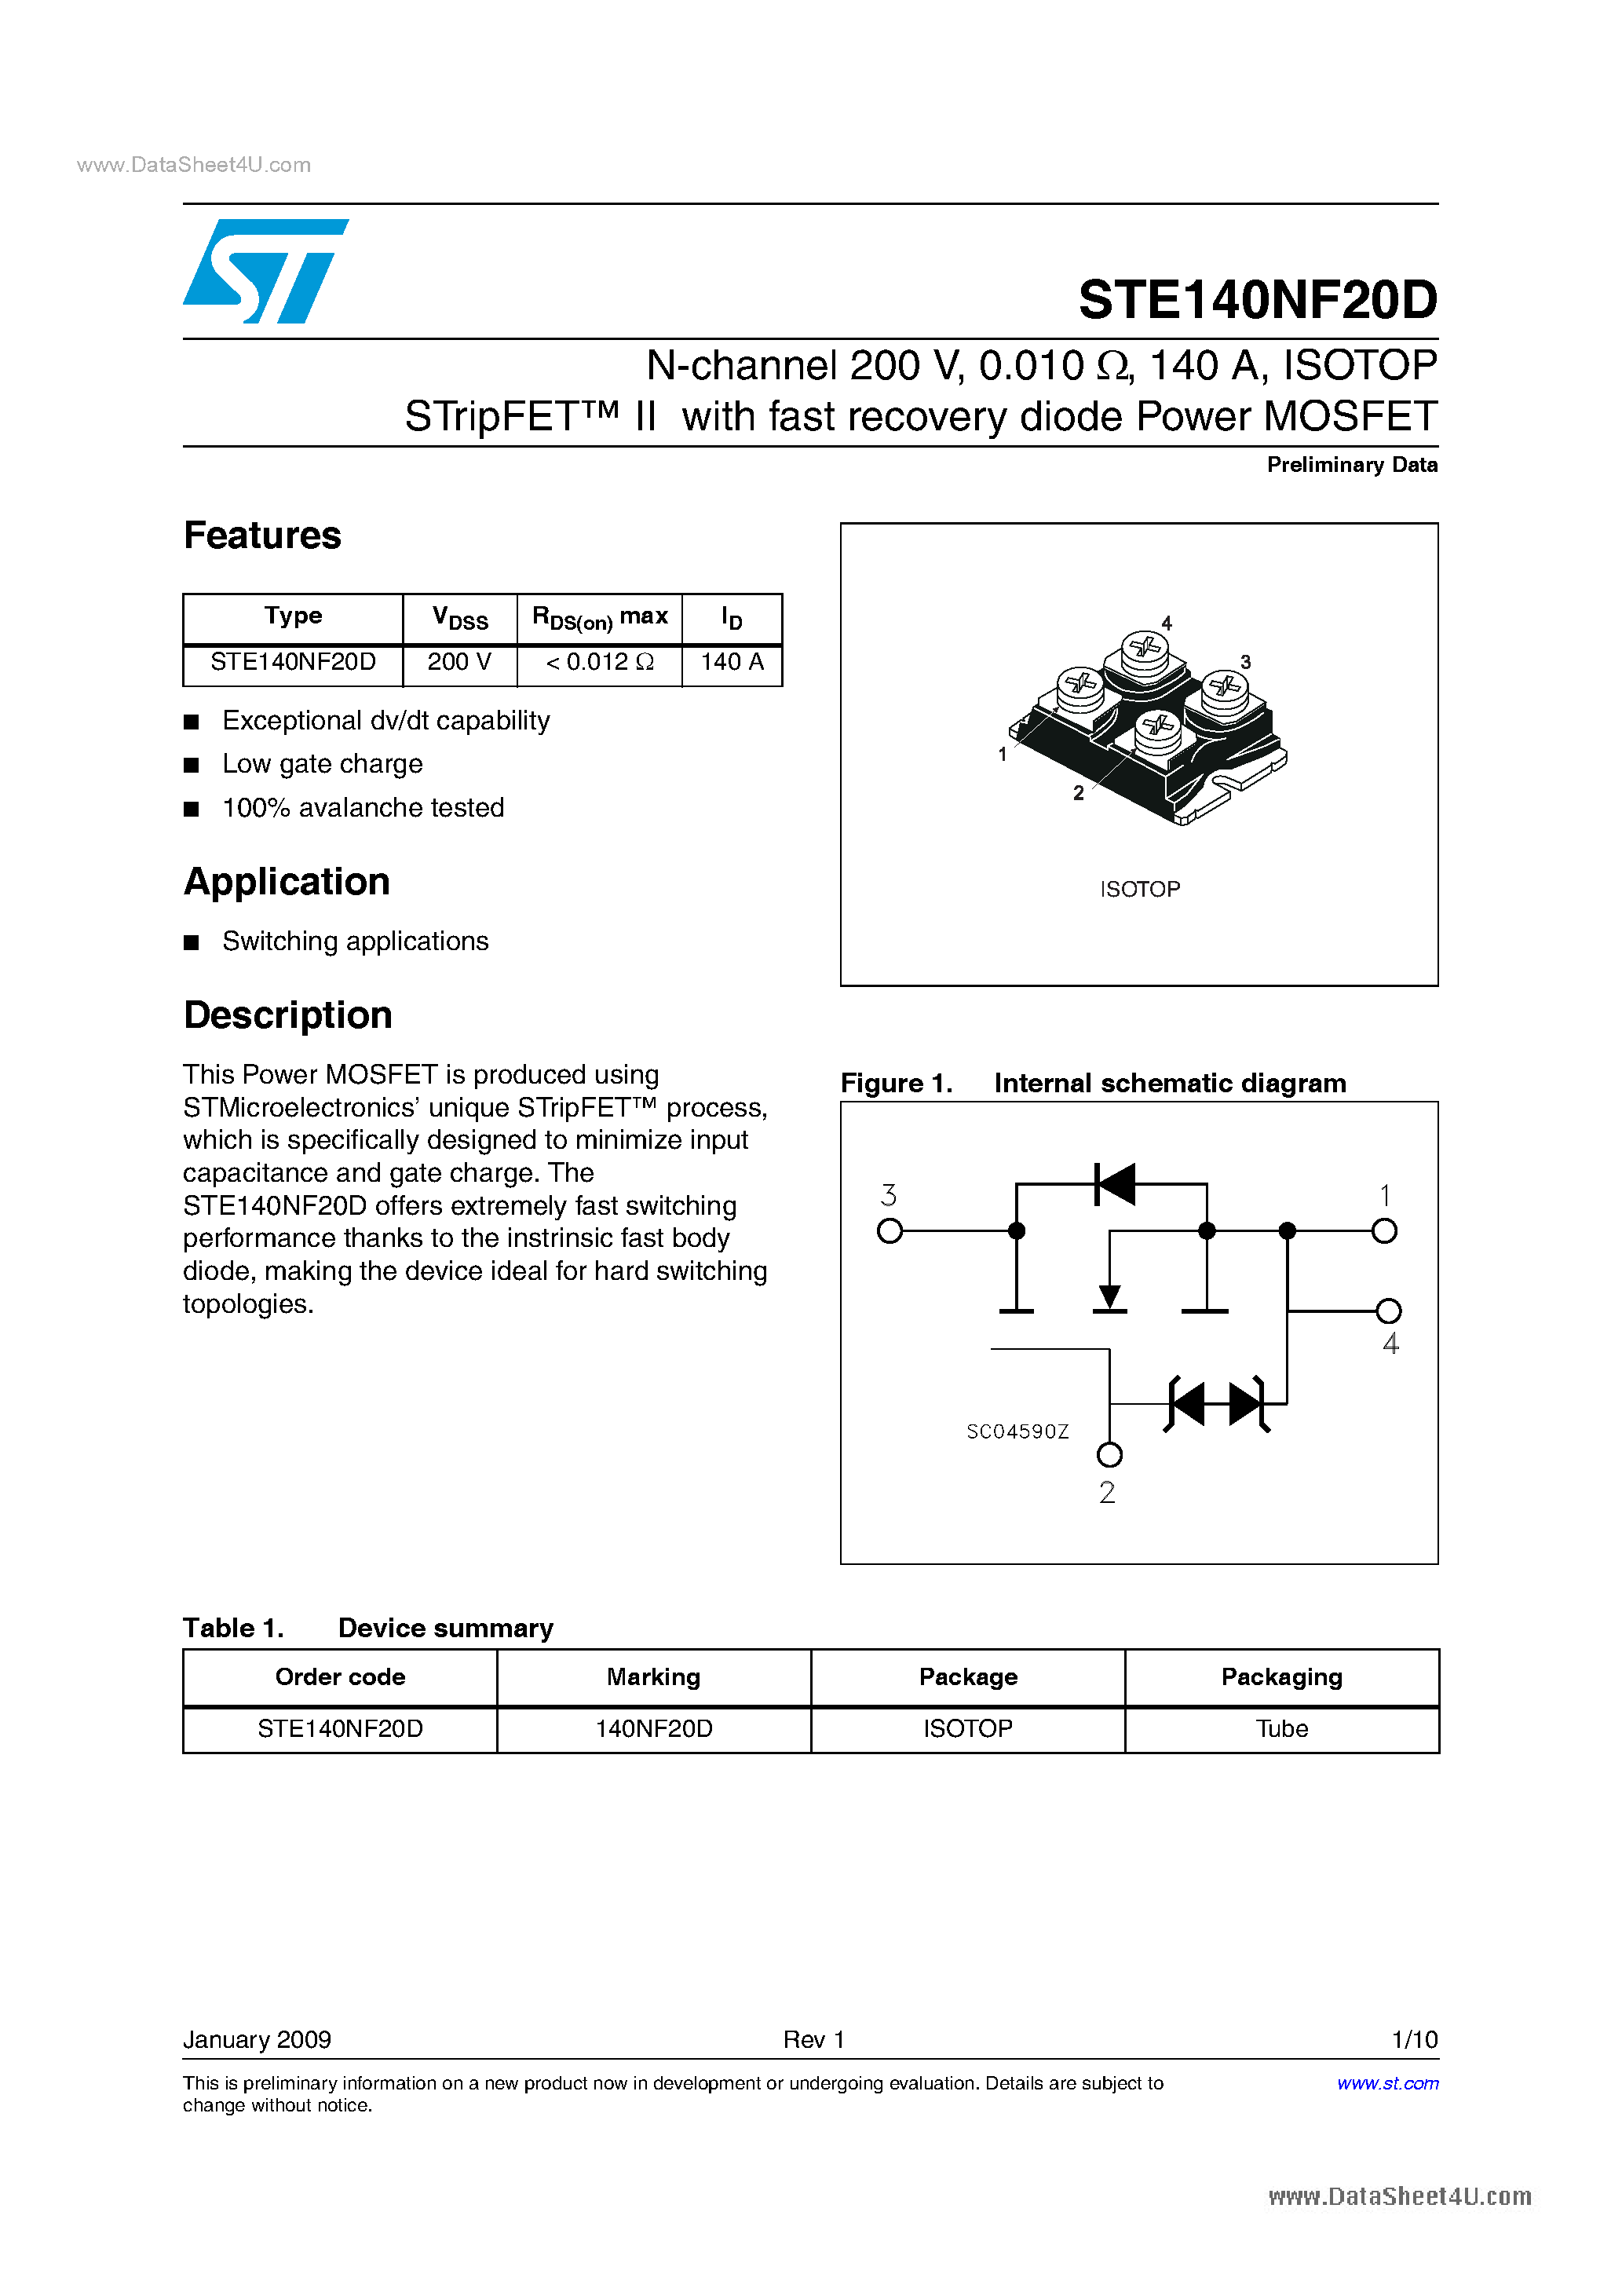 Datasheet STE140NF20D - Power MOSFET page 1